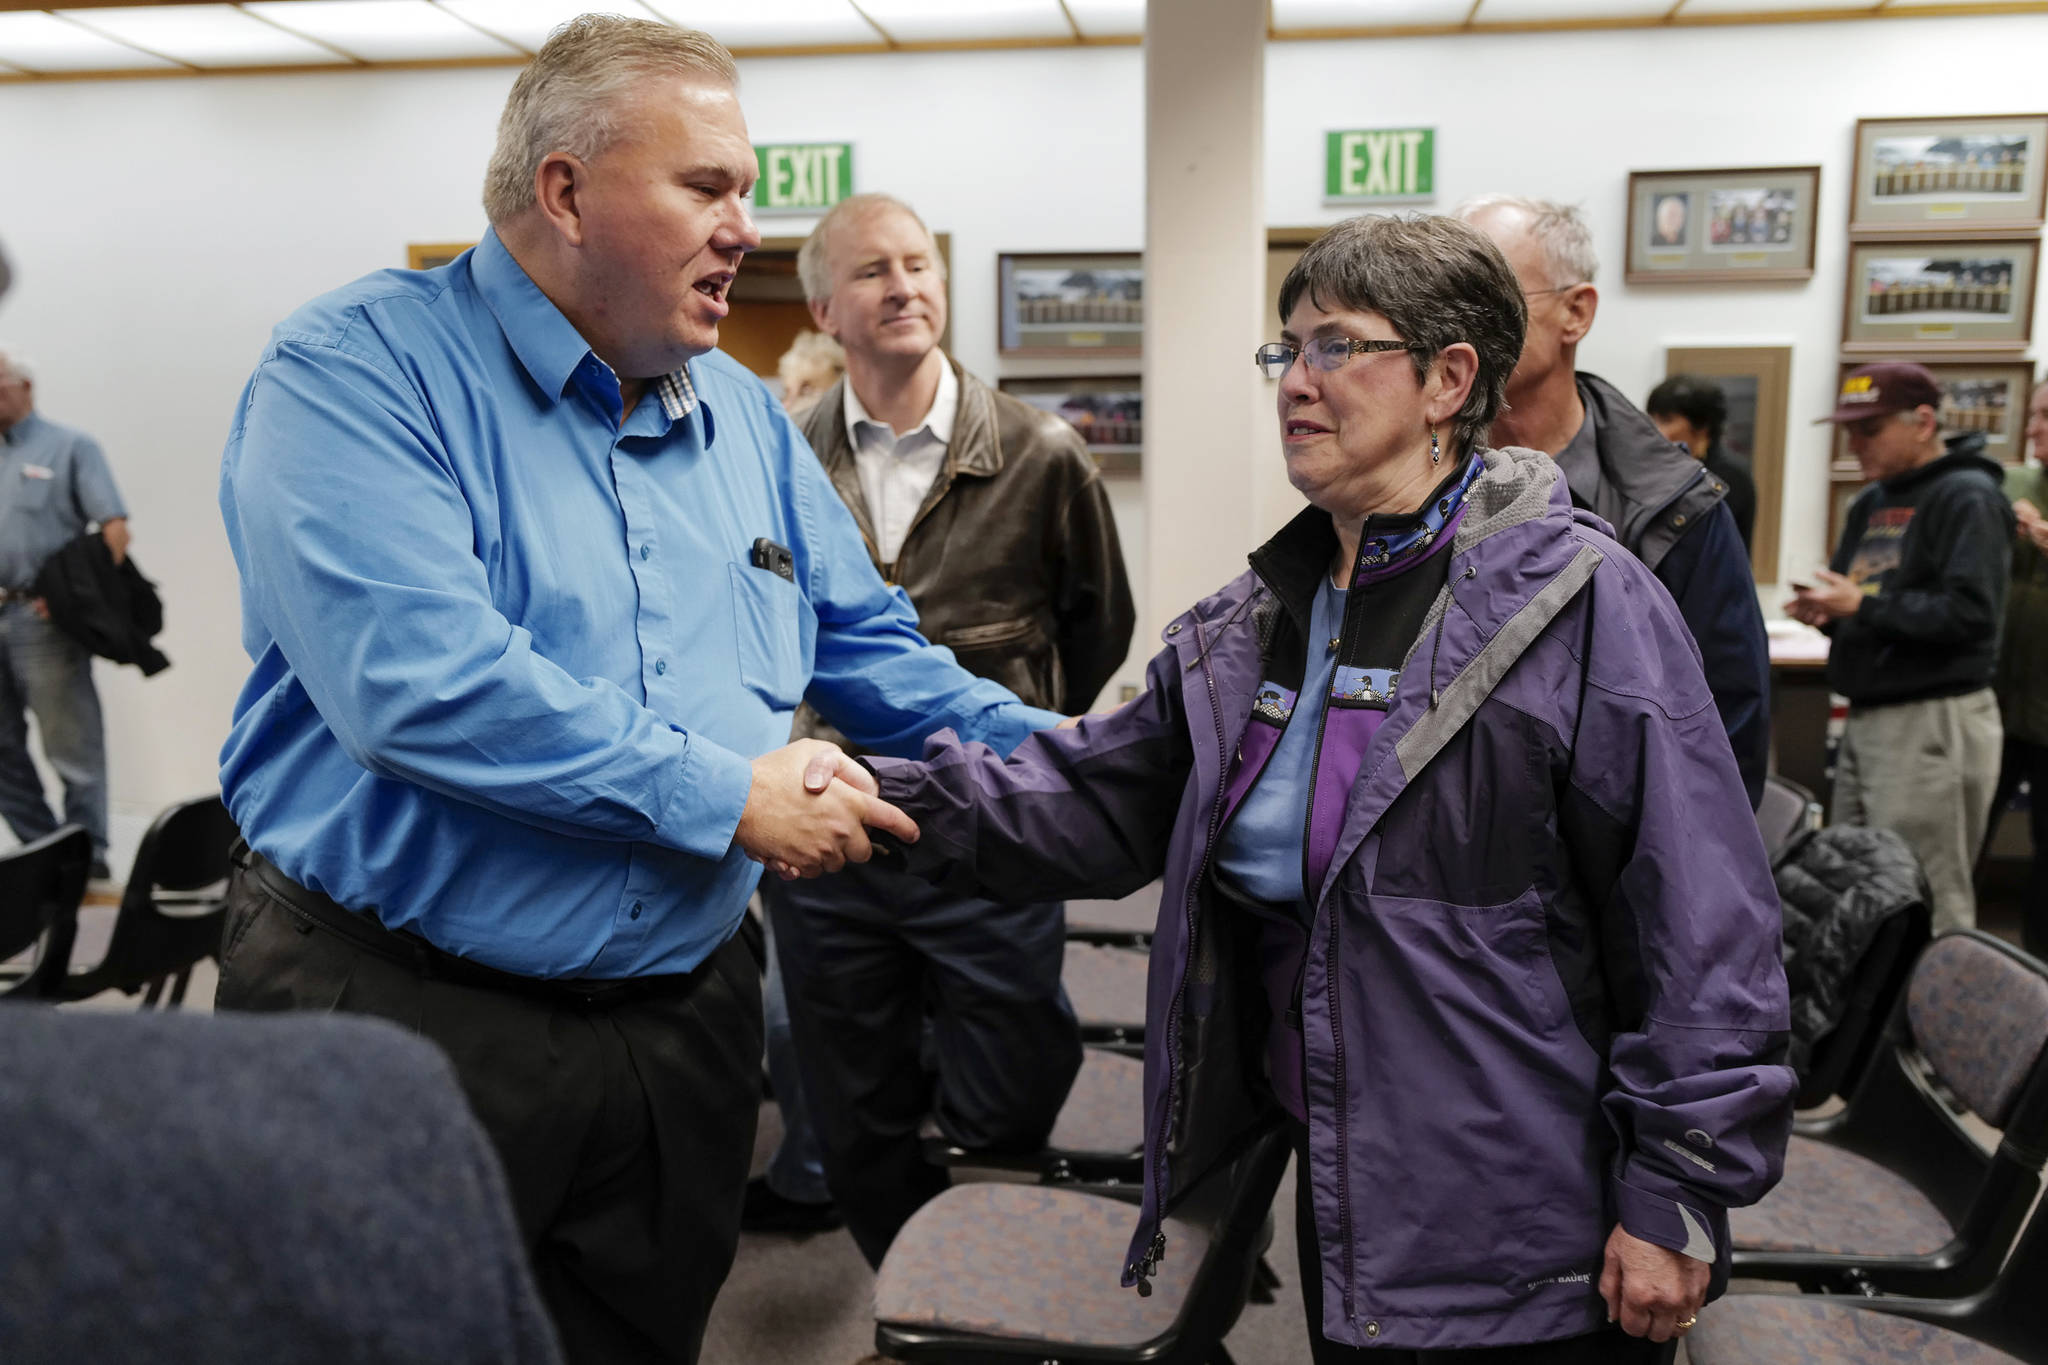 School board candidates Emil Mackey and Deedie Sorenson greet each other at City Hall on Tuesday, Oct. 1, 2019. (Michael Penn | Juneau Empire)